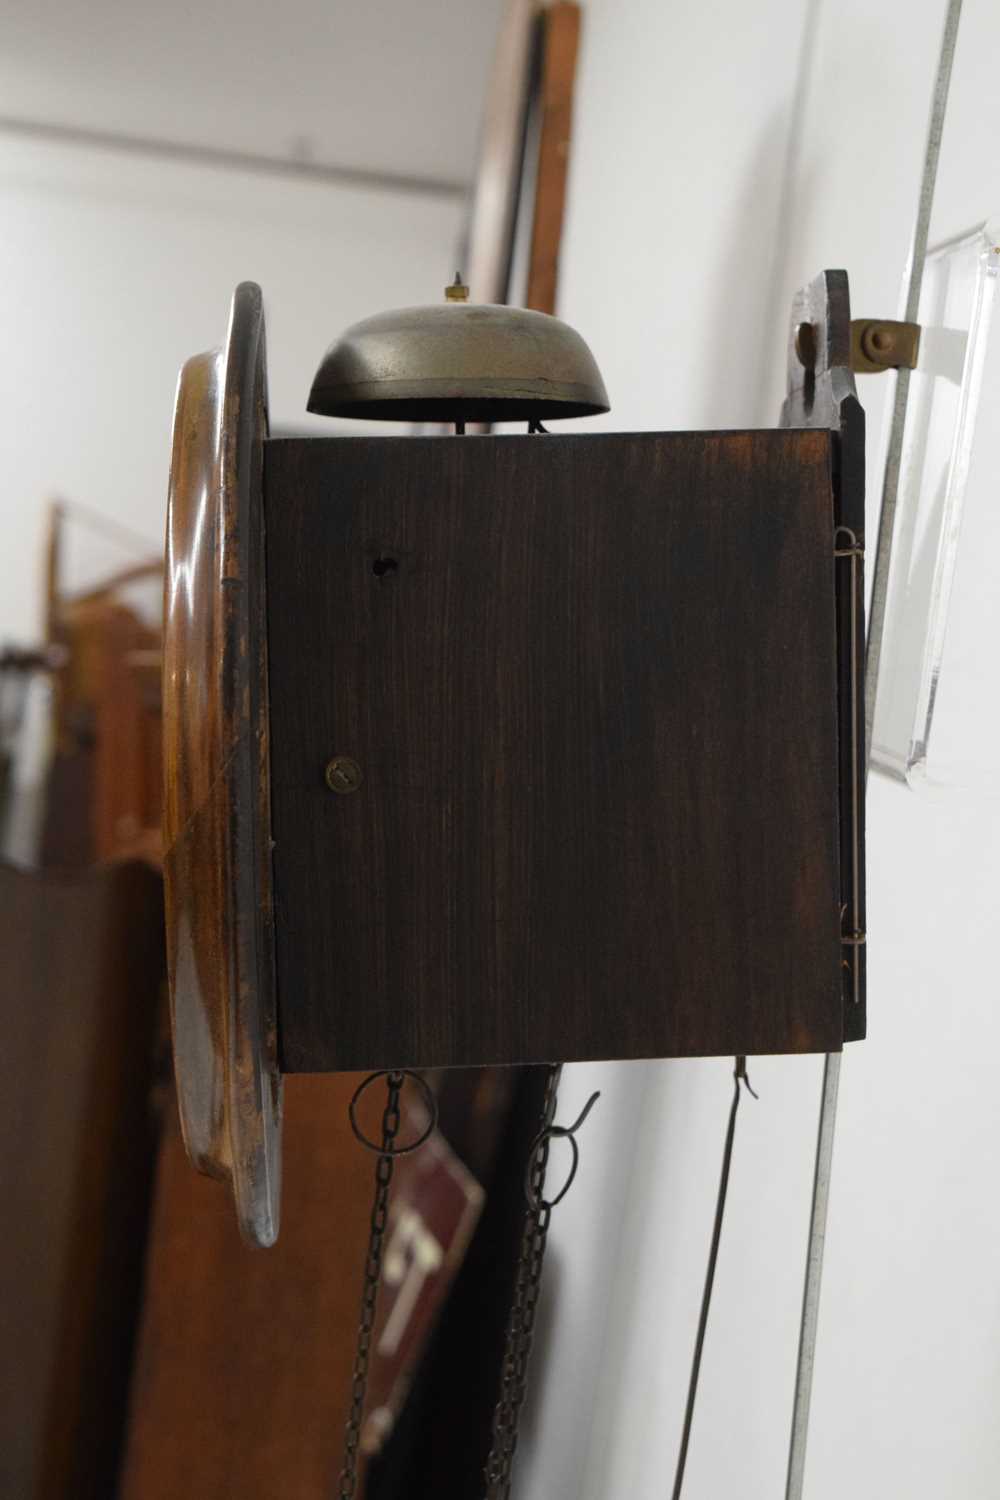 Postman's alarm-type weight-driven wall clock - Image 6 of 10